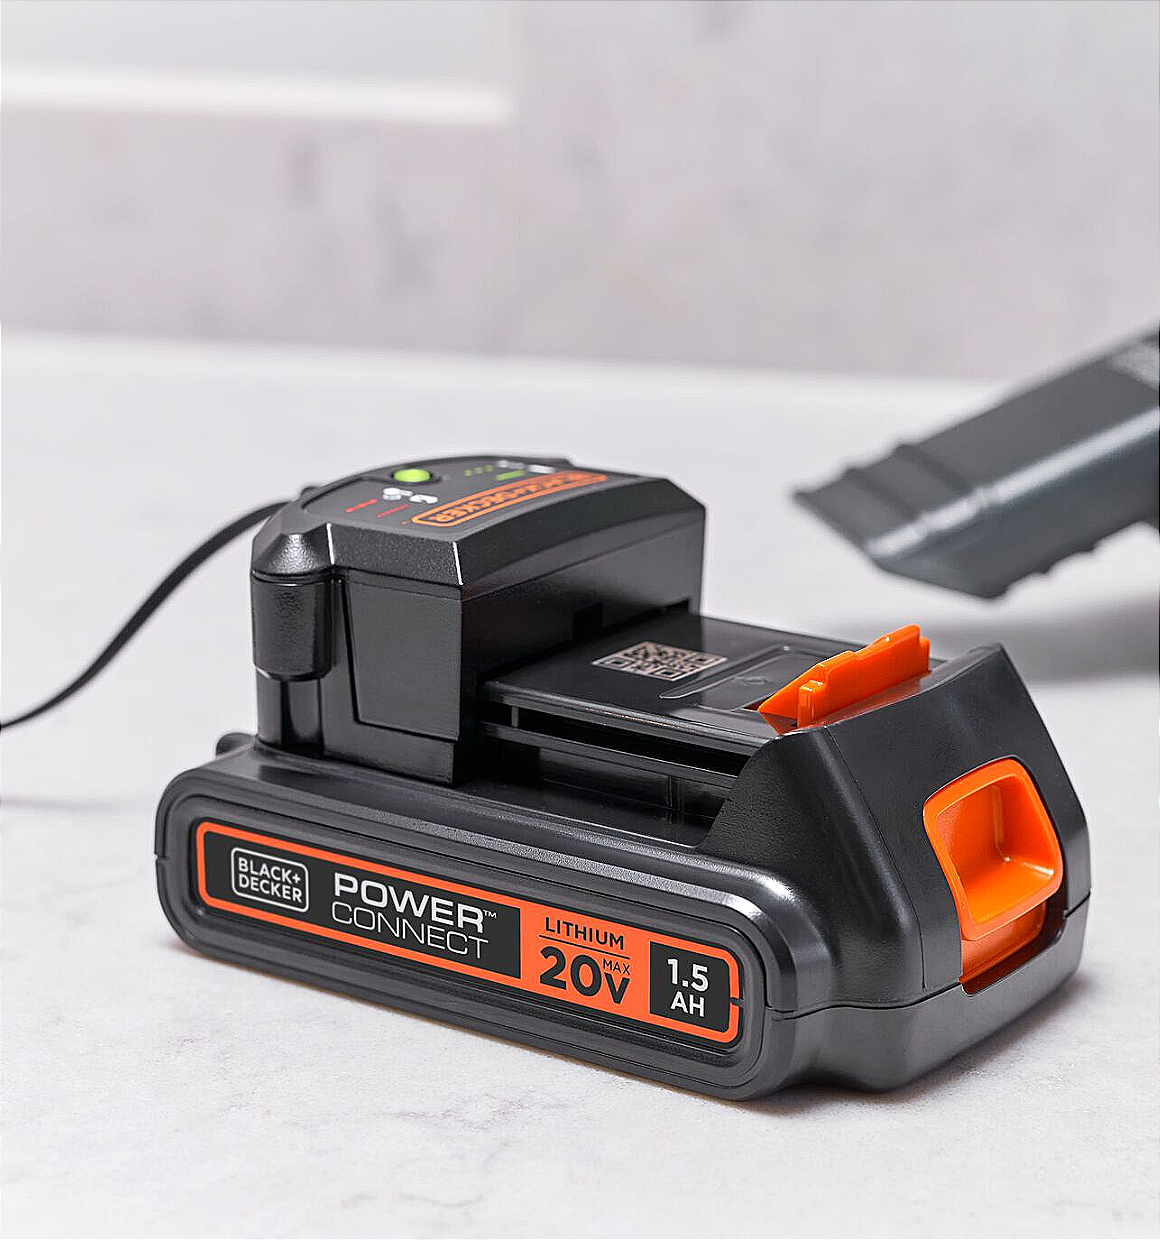 20V Max* Powerconnect 1.5Ah Lithium Ion Battery + Charger